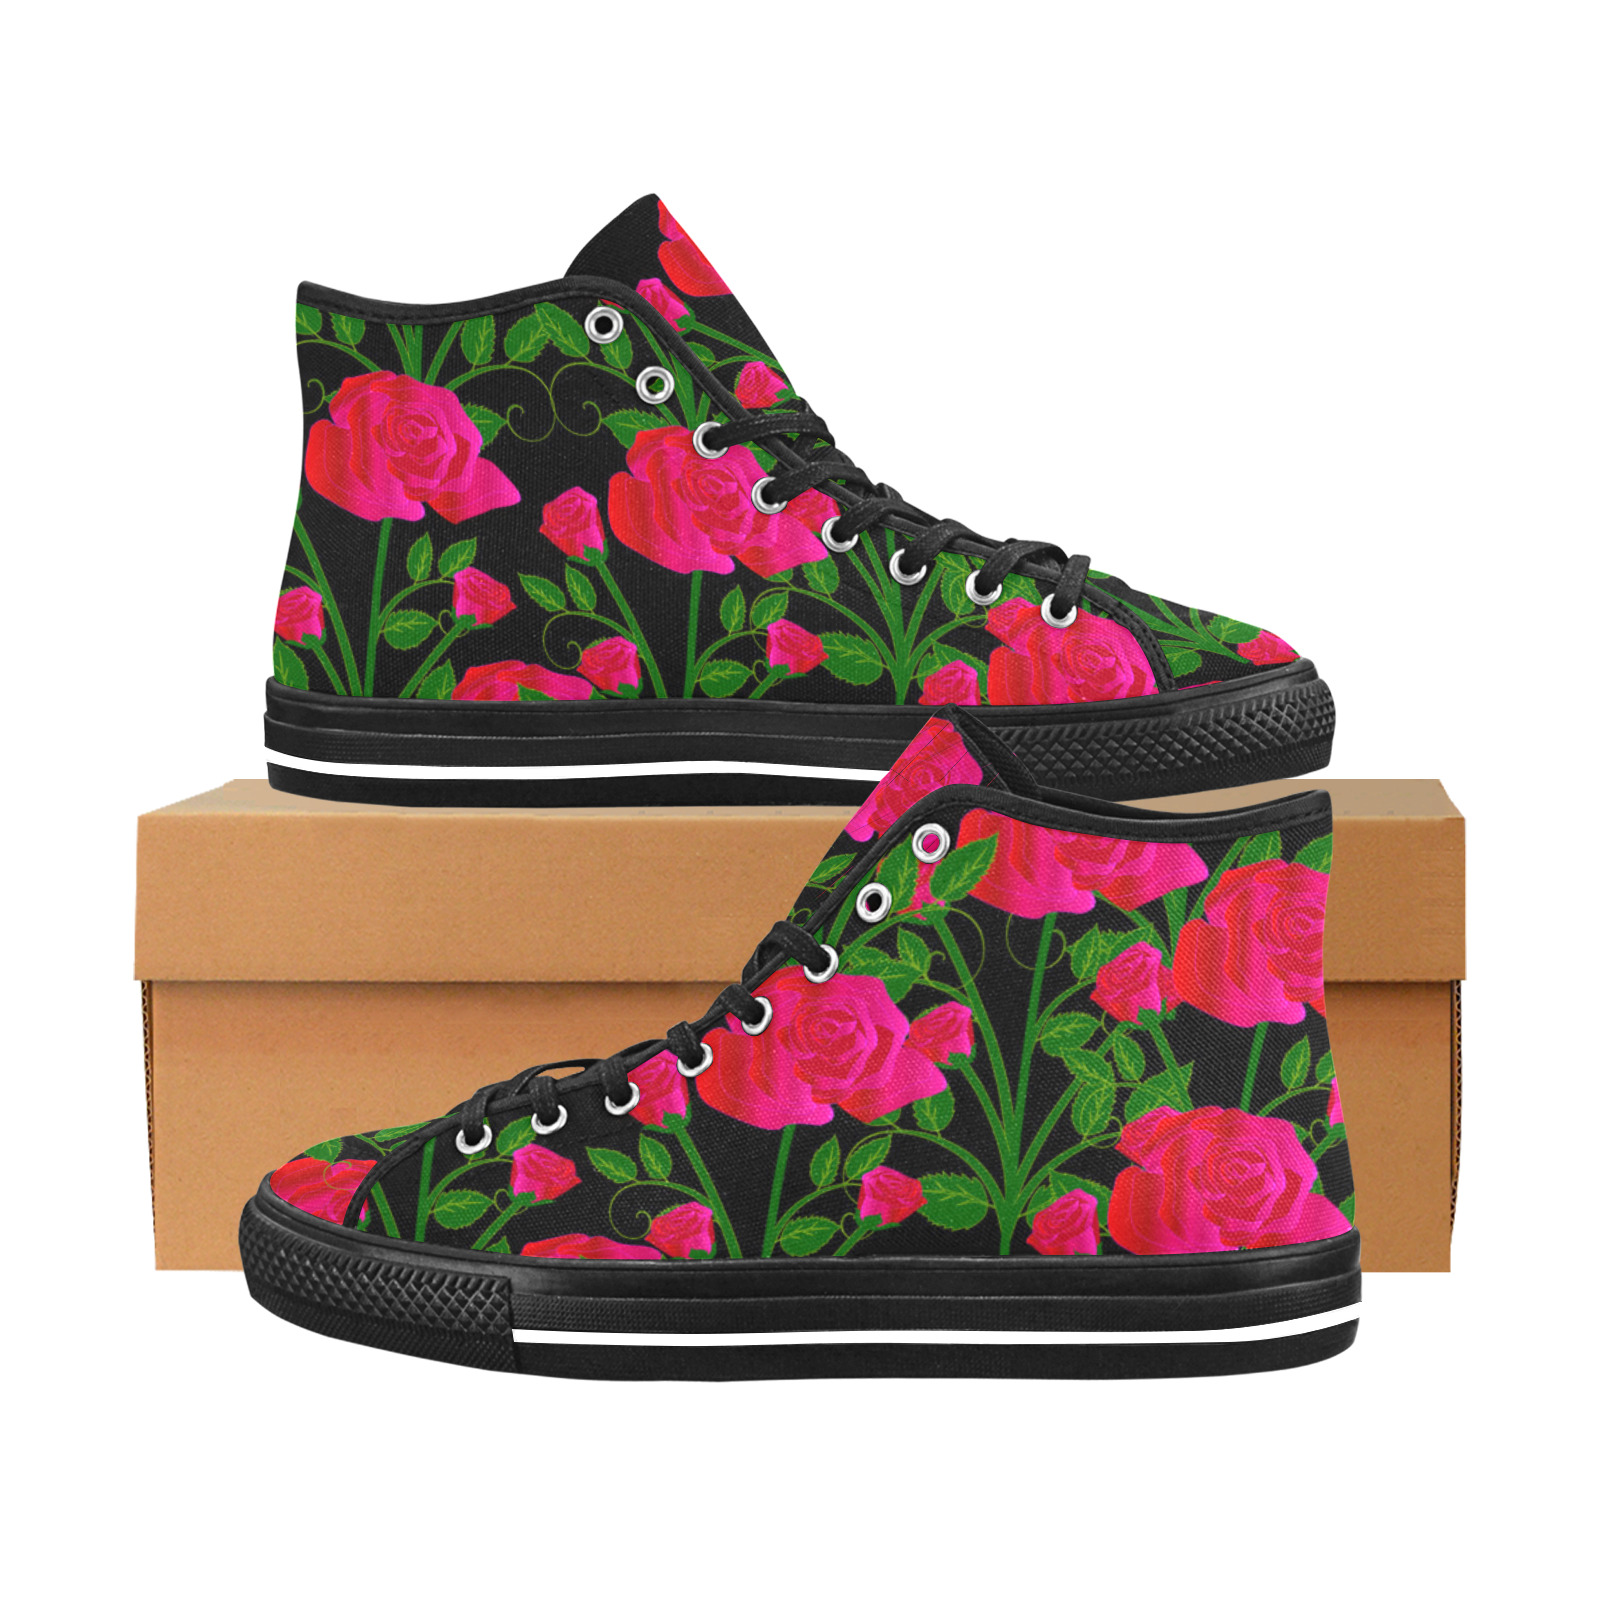 roses at night Vancouver H Women's Canvas Shoes (1013-1)